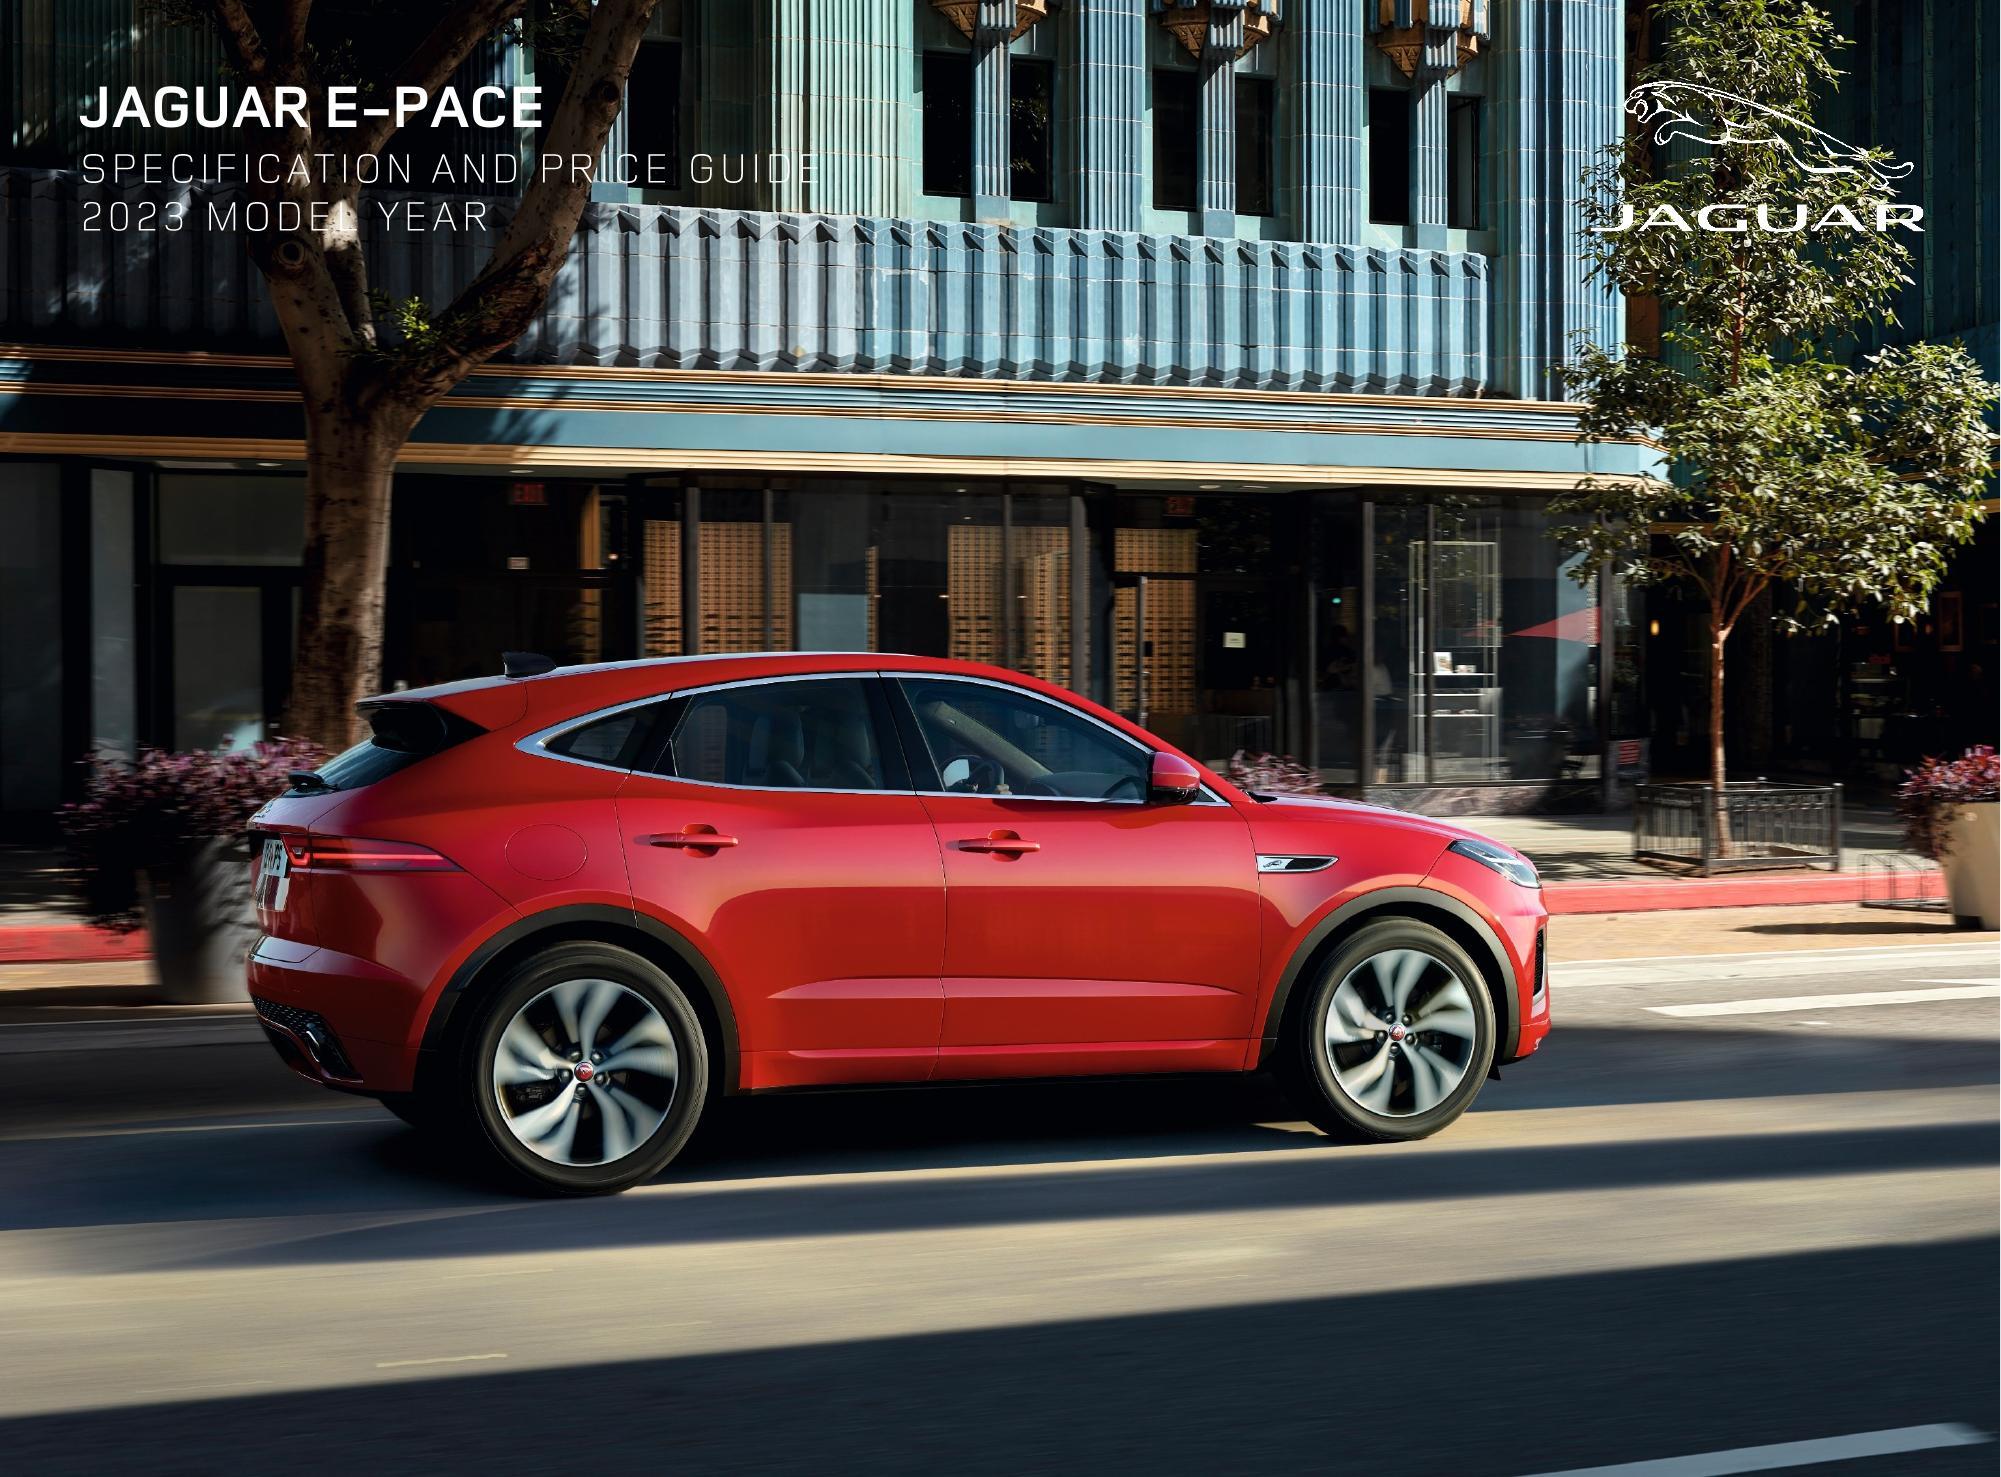 2023-jaguar-e-pace-specification-and-price-guide.pdf